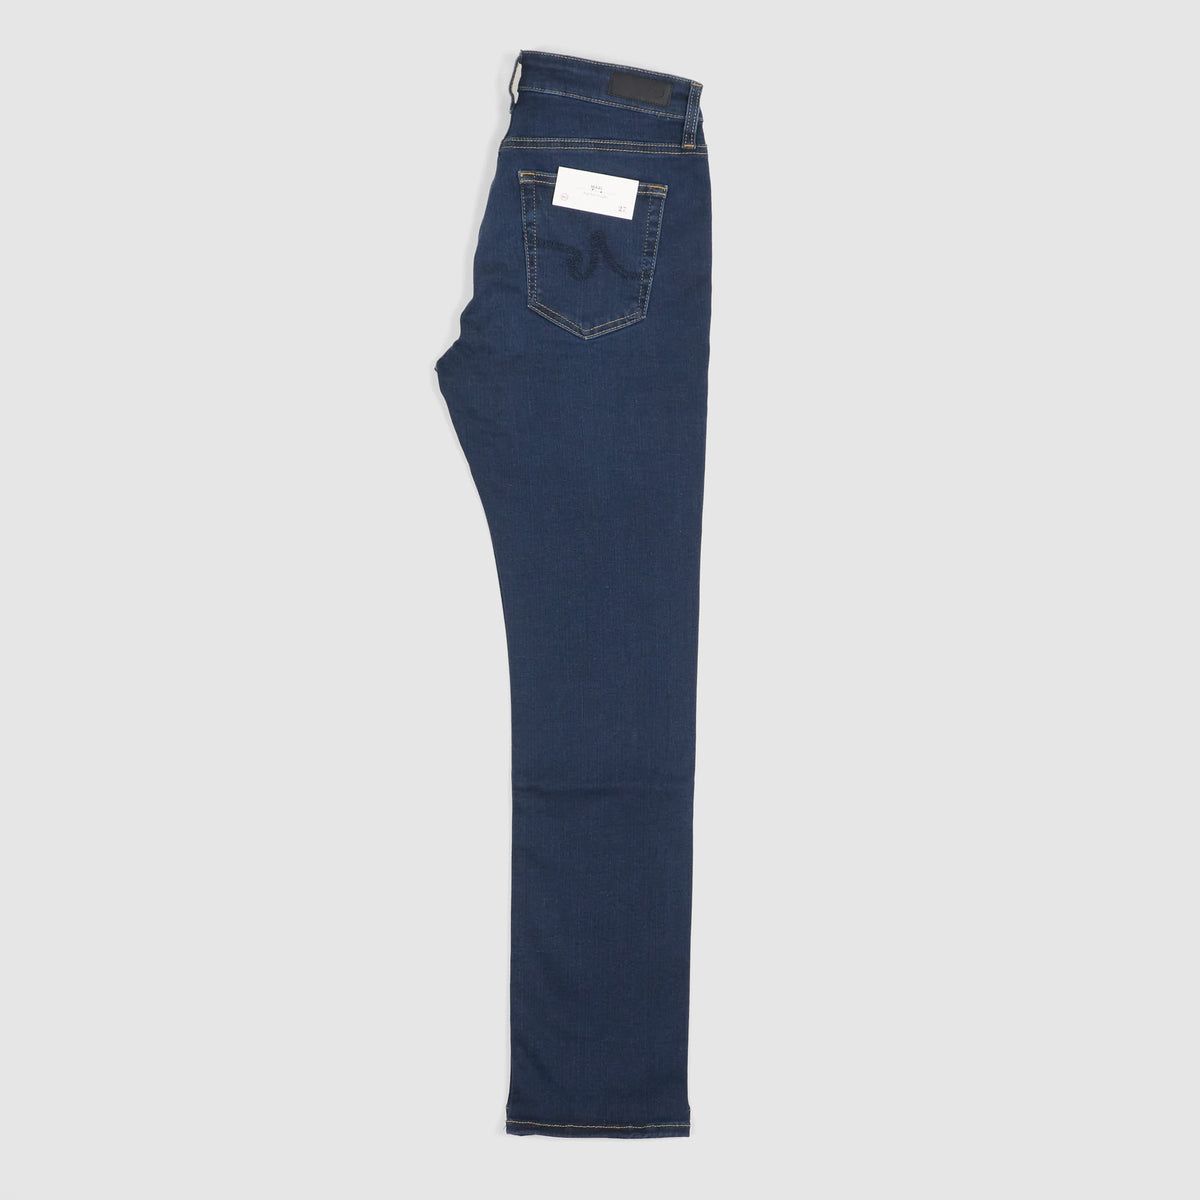 Adriano Goldschmied Ladies Mari High Rise Jeans